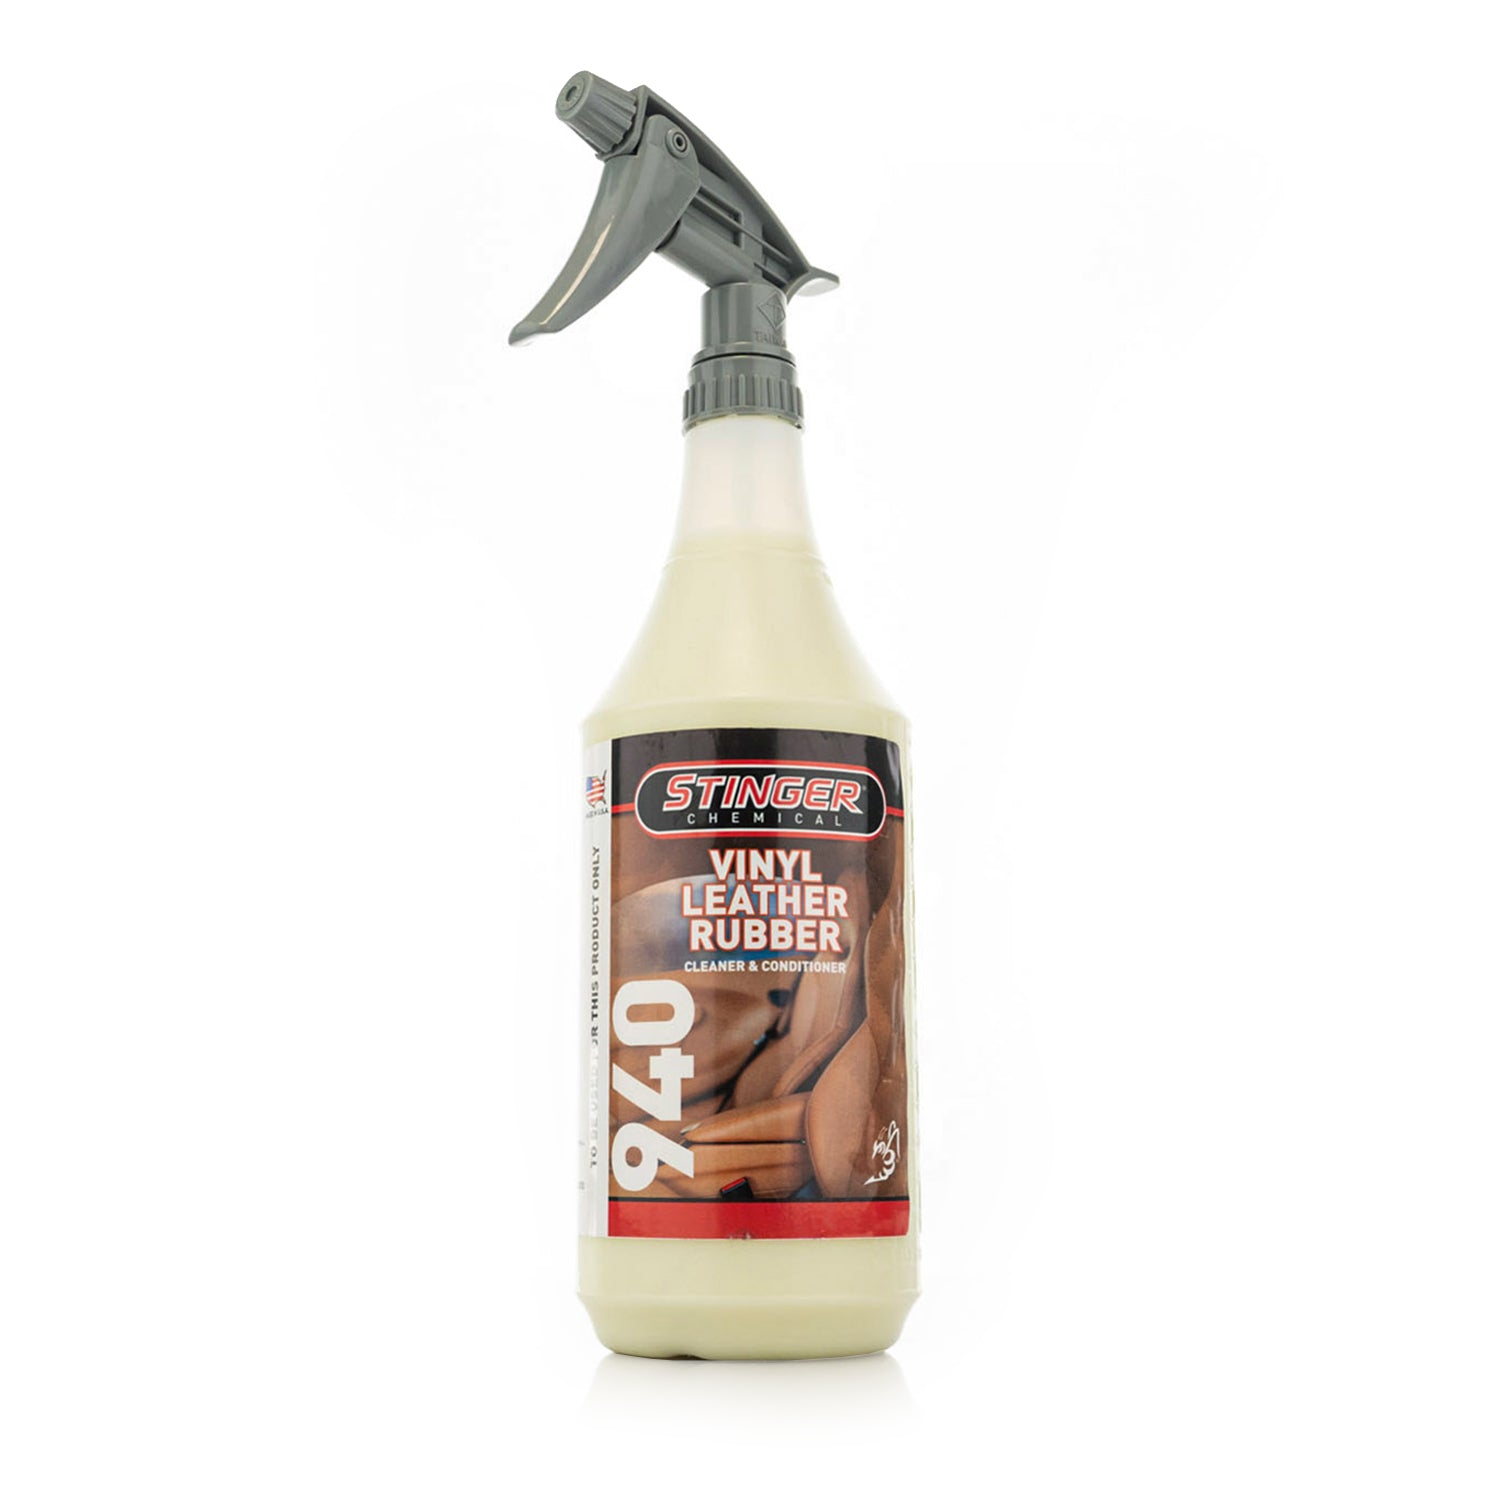 stinger-chemicals-vinyl-leather-rubber-cleaner-and-conditioner-quart